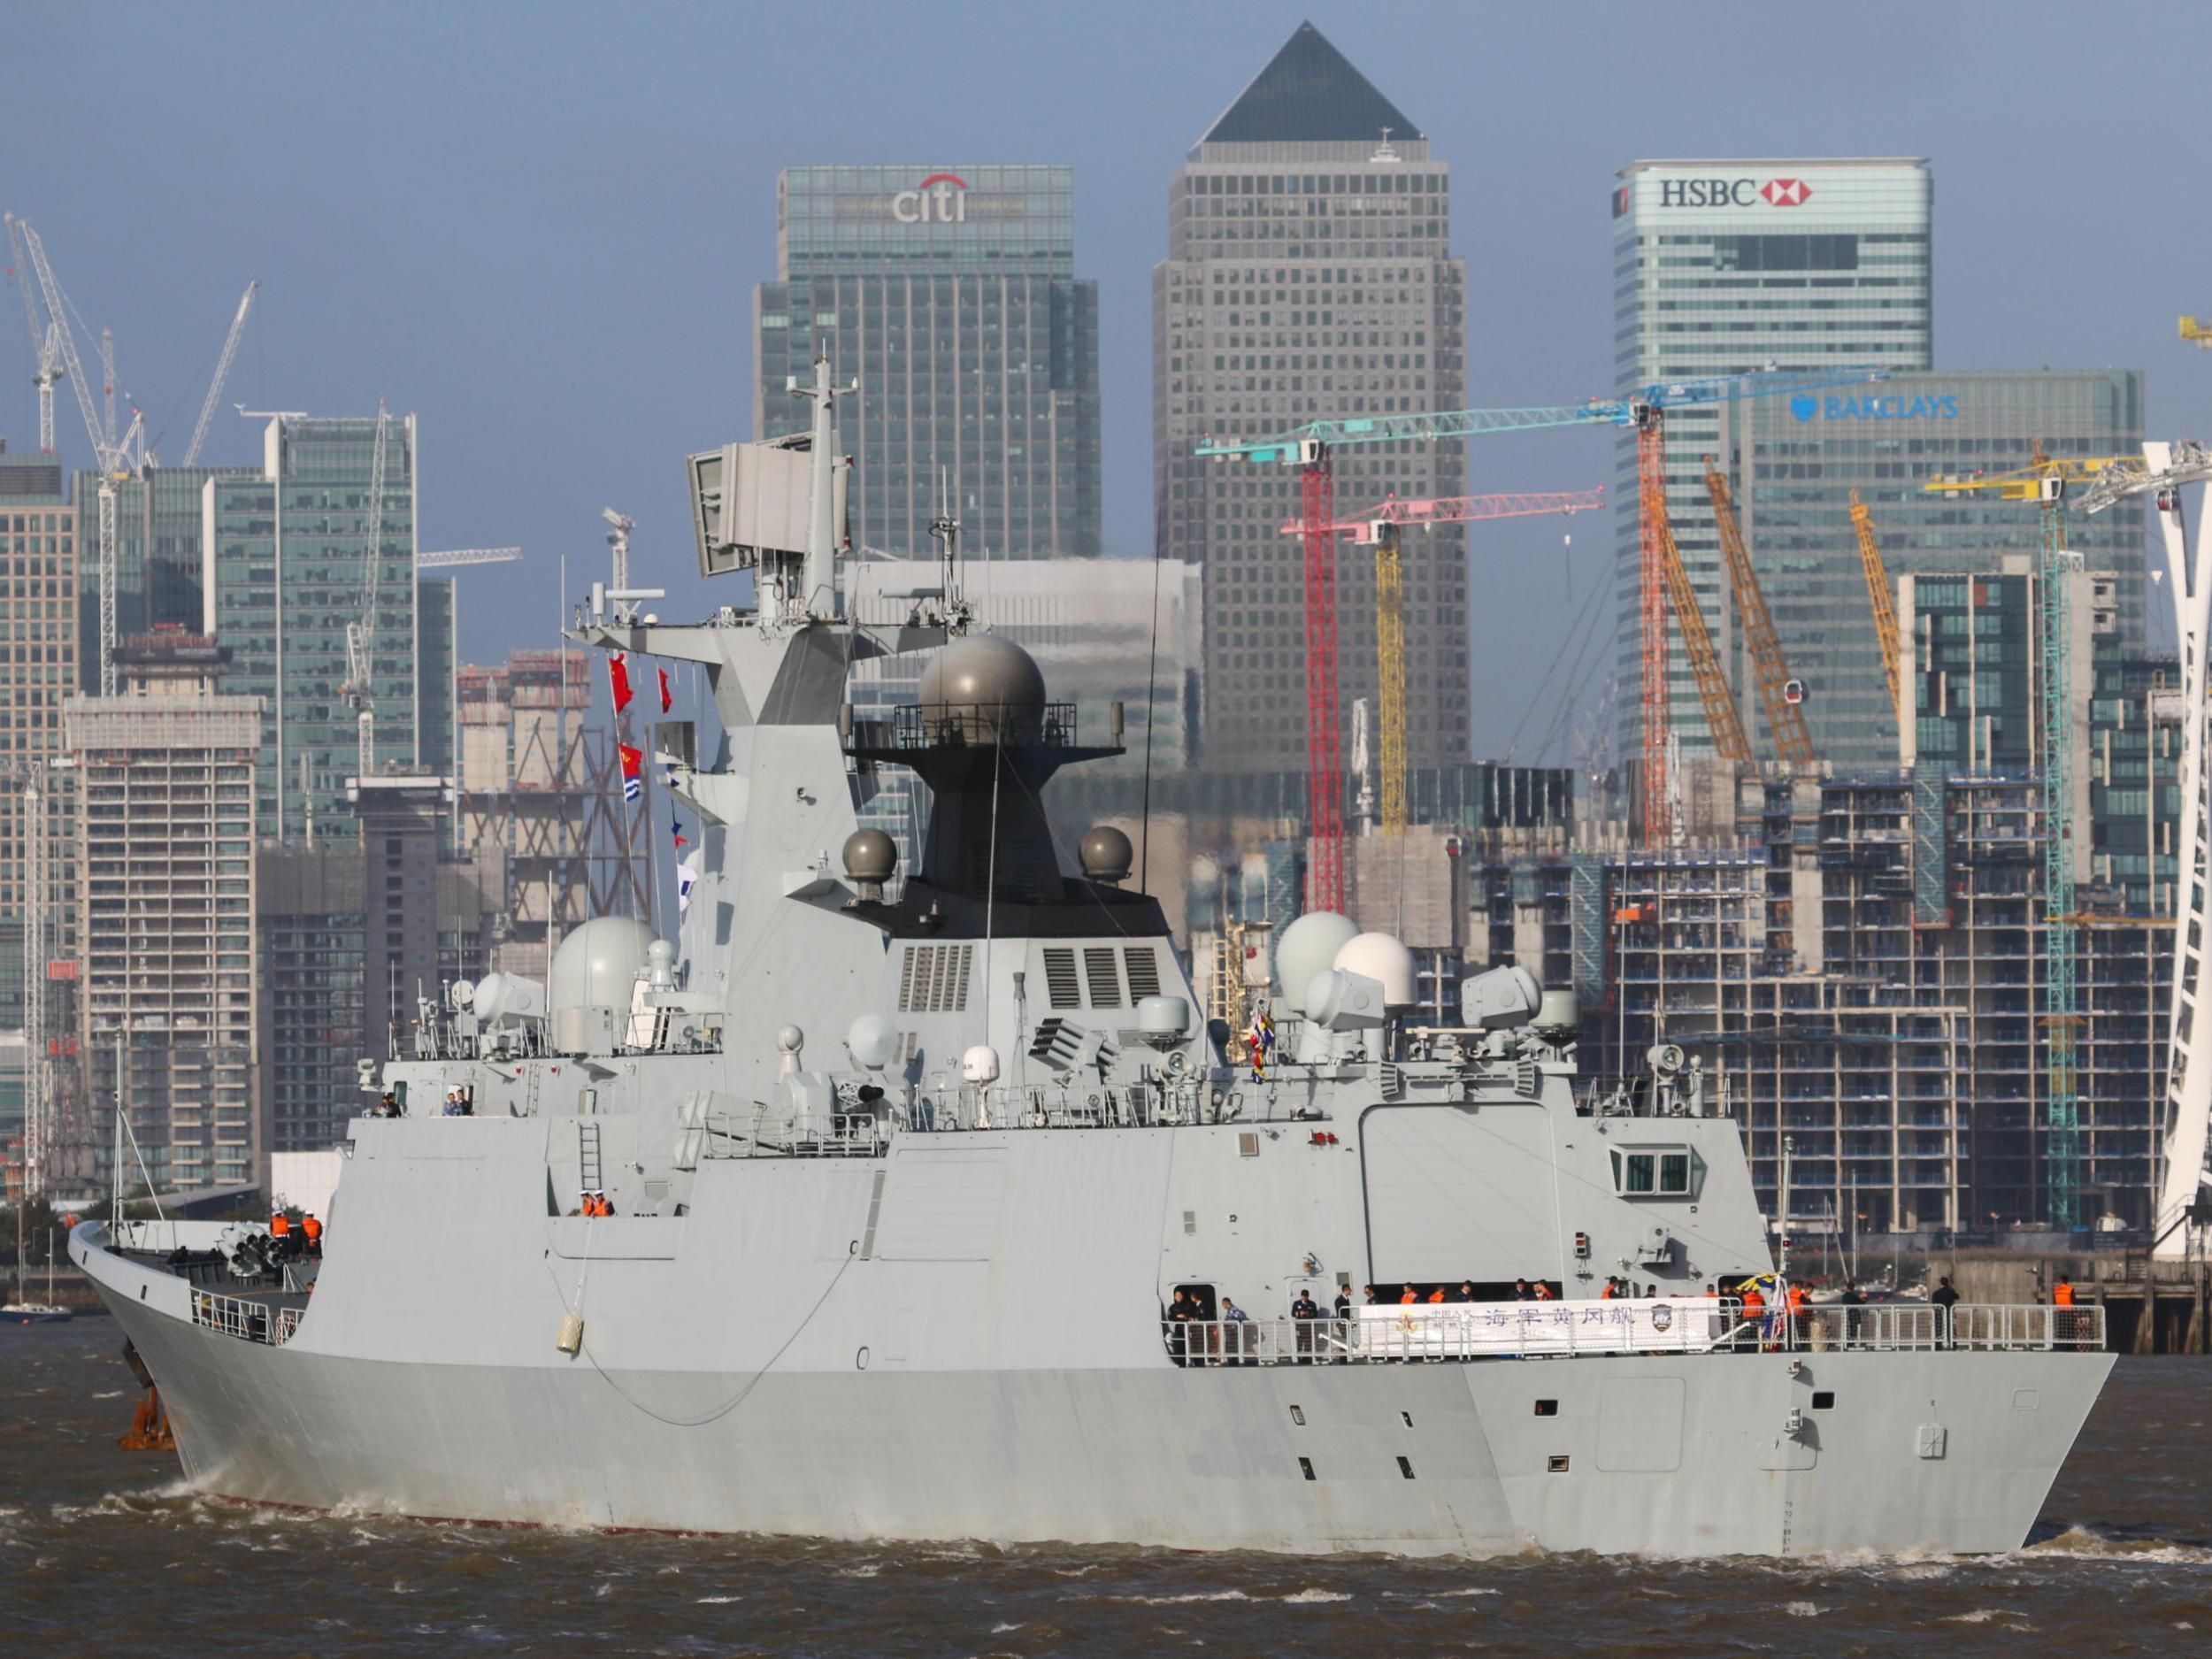 Chinese navy ship Huanggang on the Thames approaching Canary Wharf